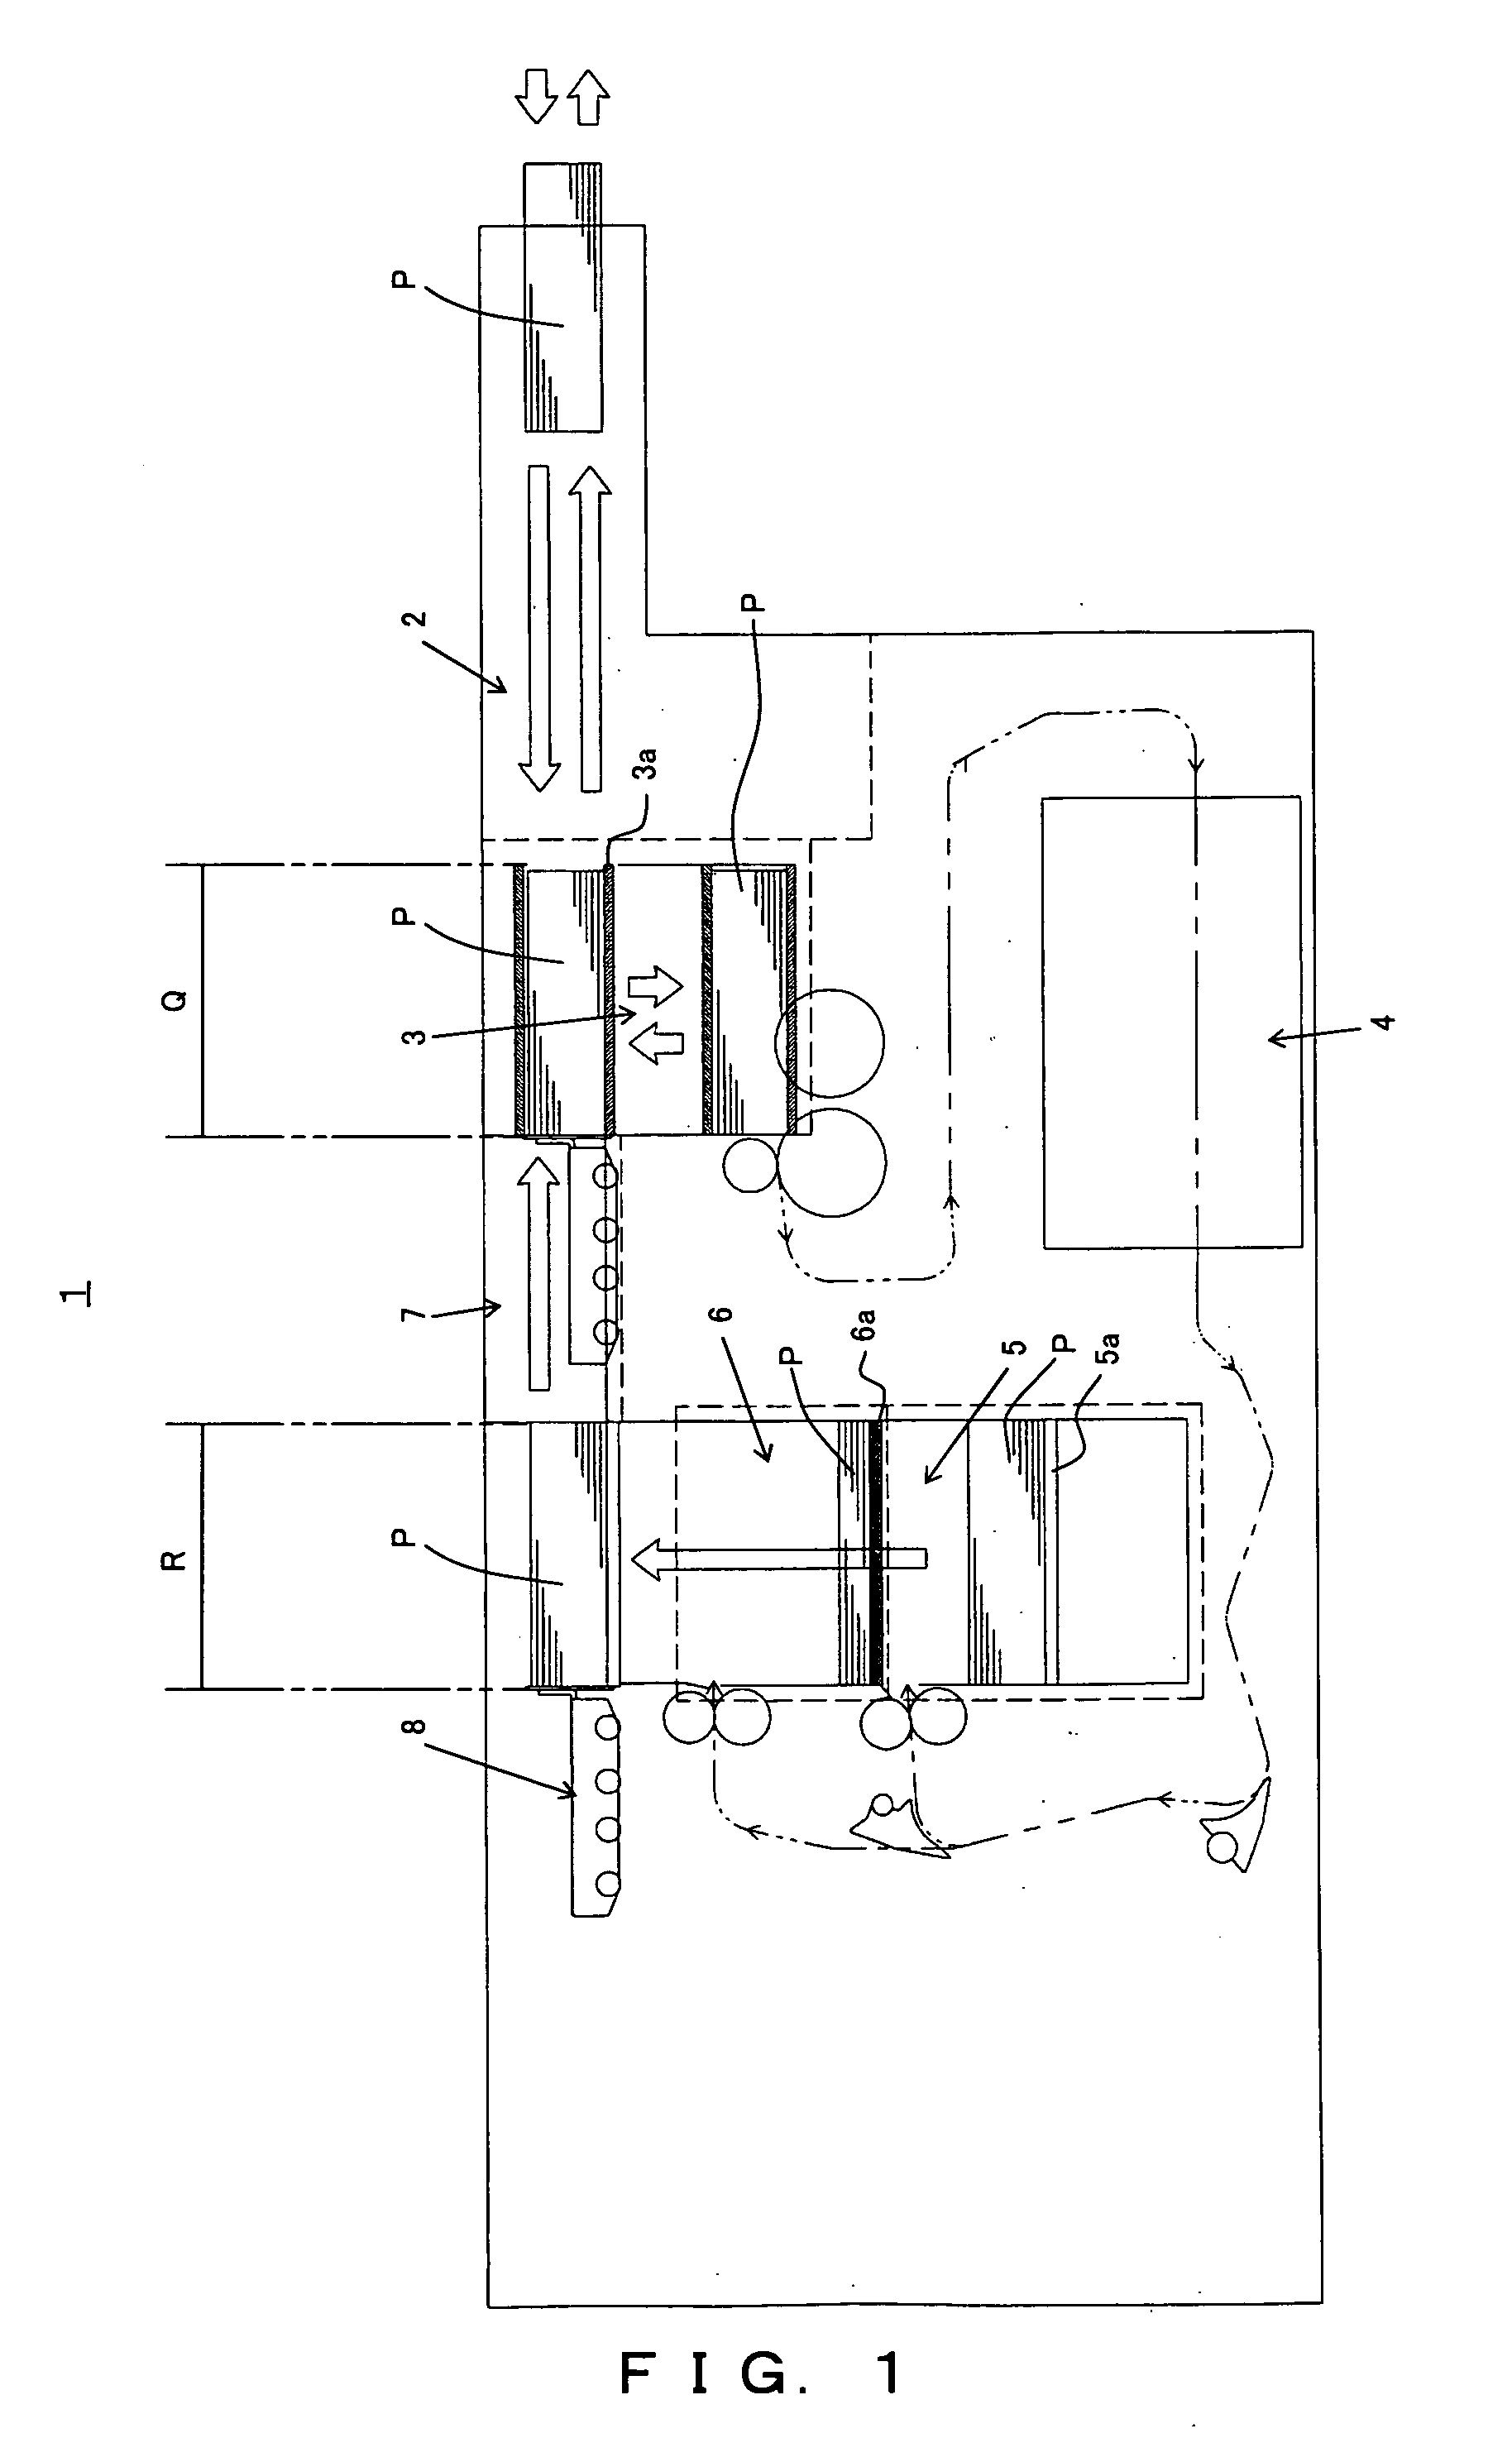 Bundle transport apparatus for paper sheet materials and handling apparatus for the same